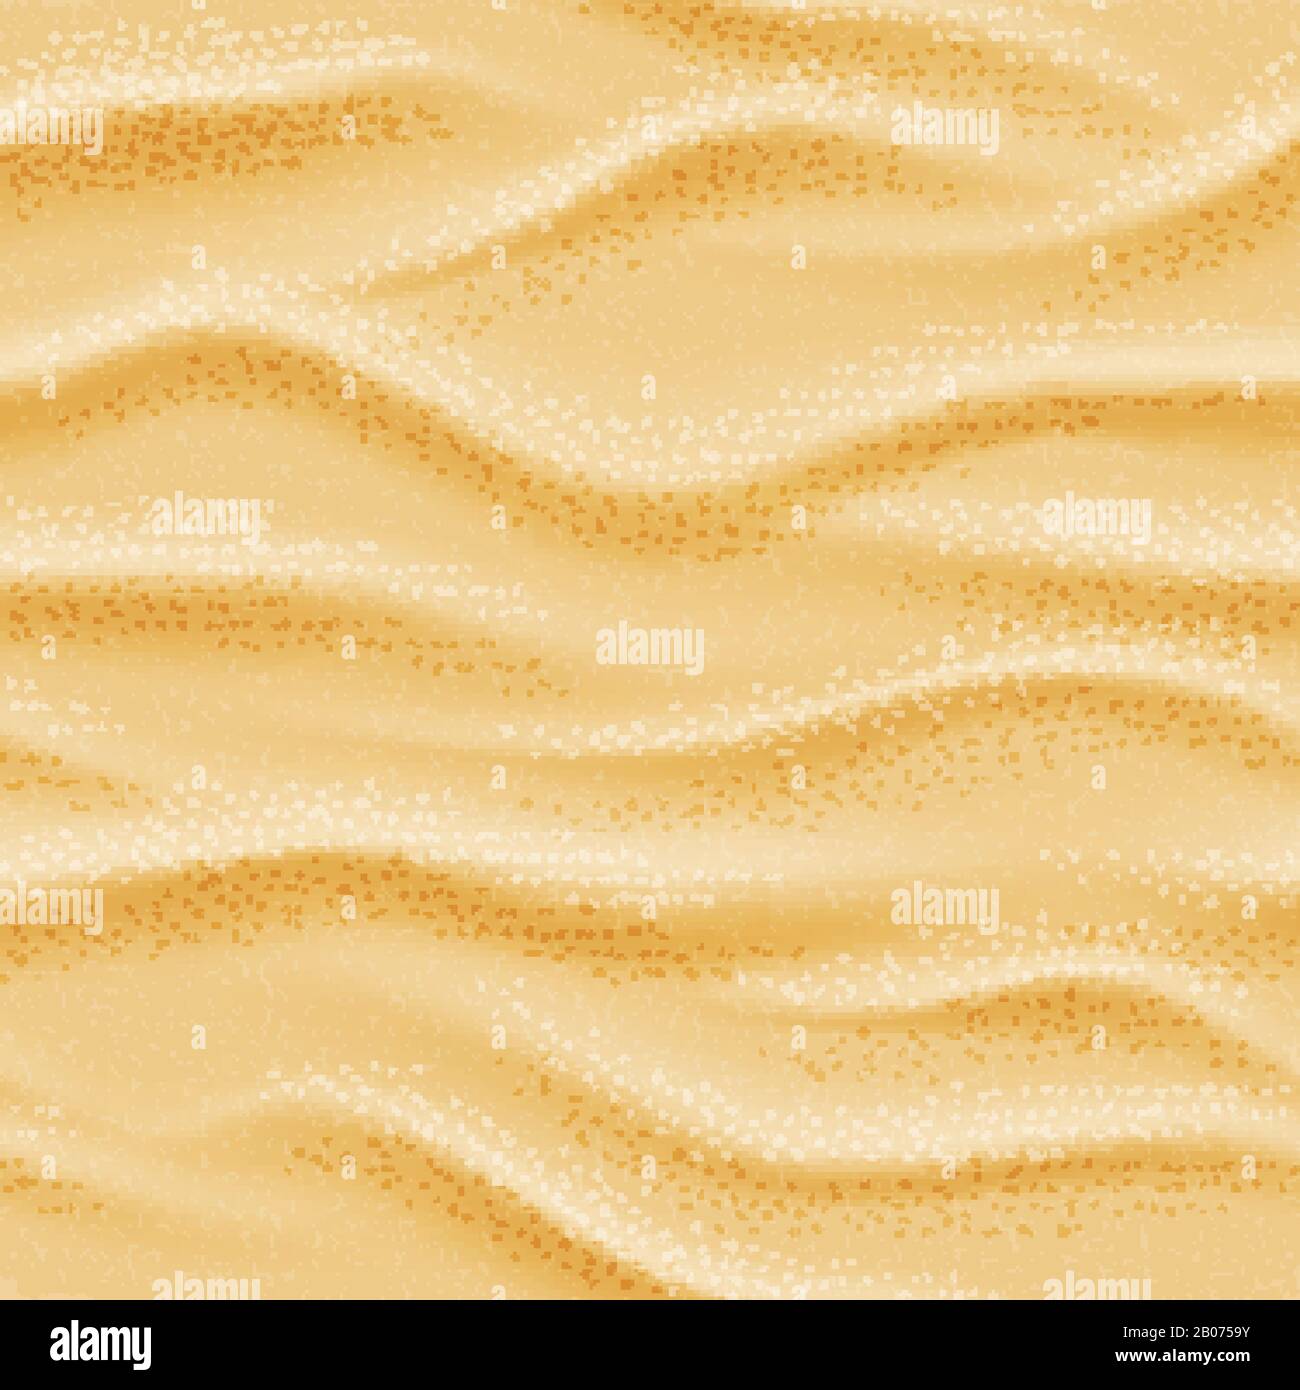 Realistic seamless vector beach sea sand background. Dry desert natural wave illustration Stock Vector